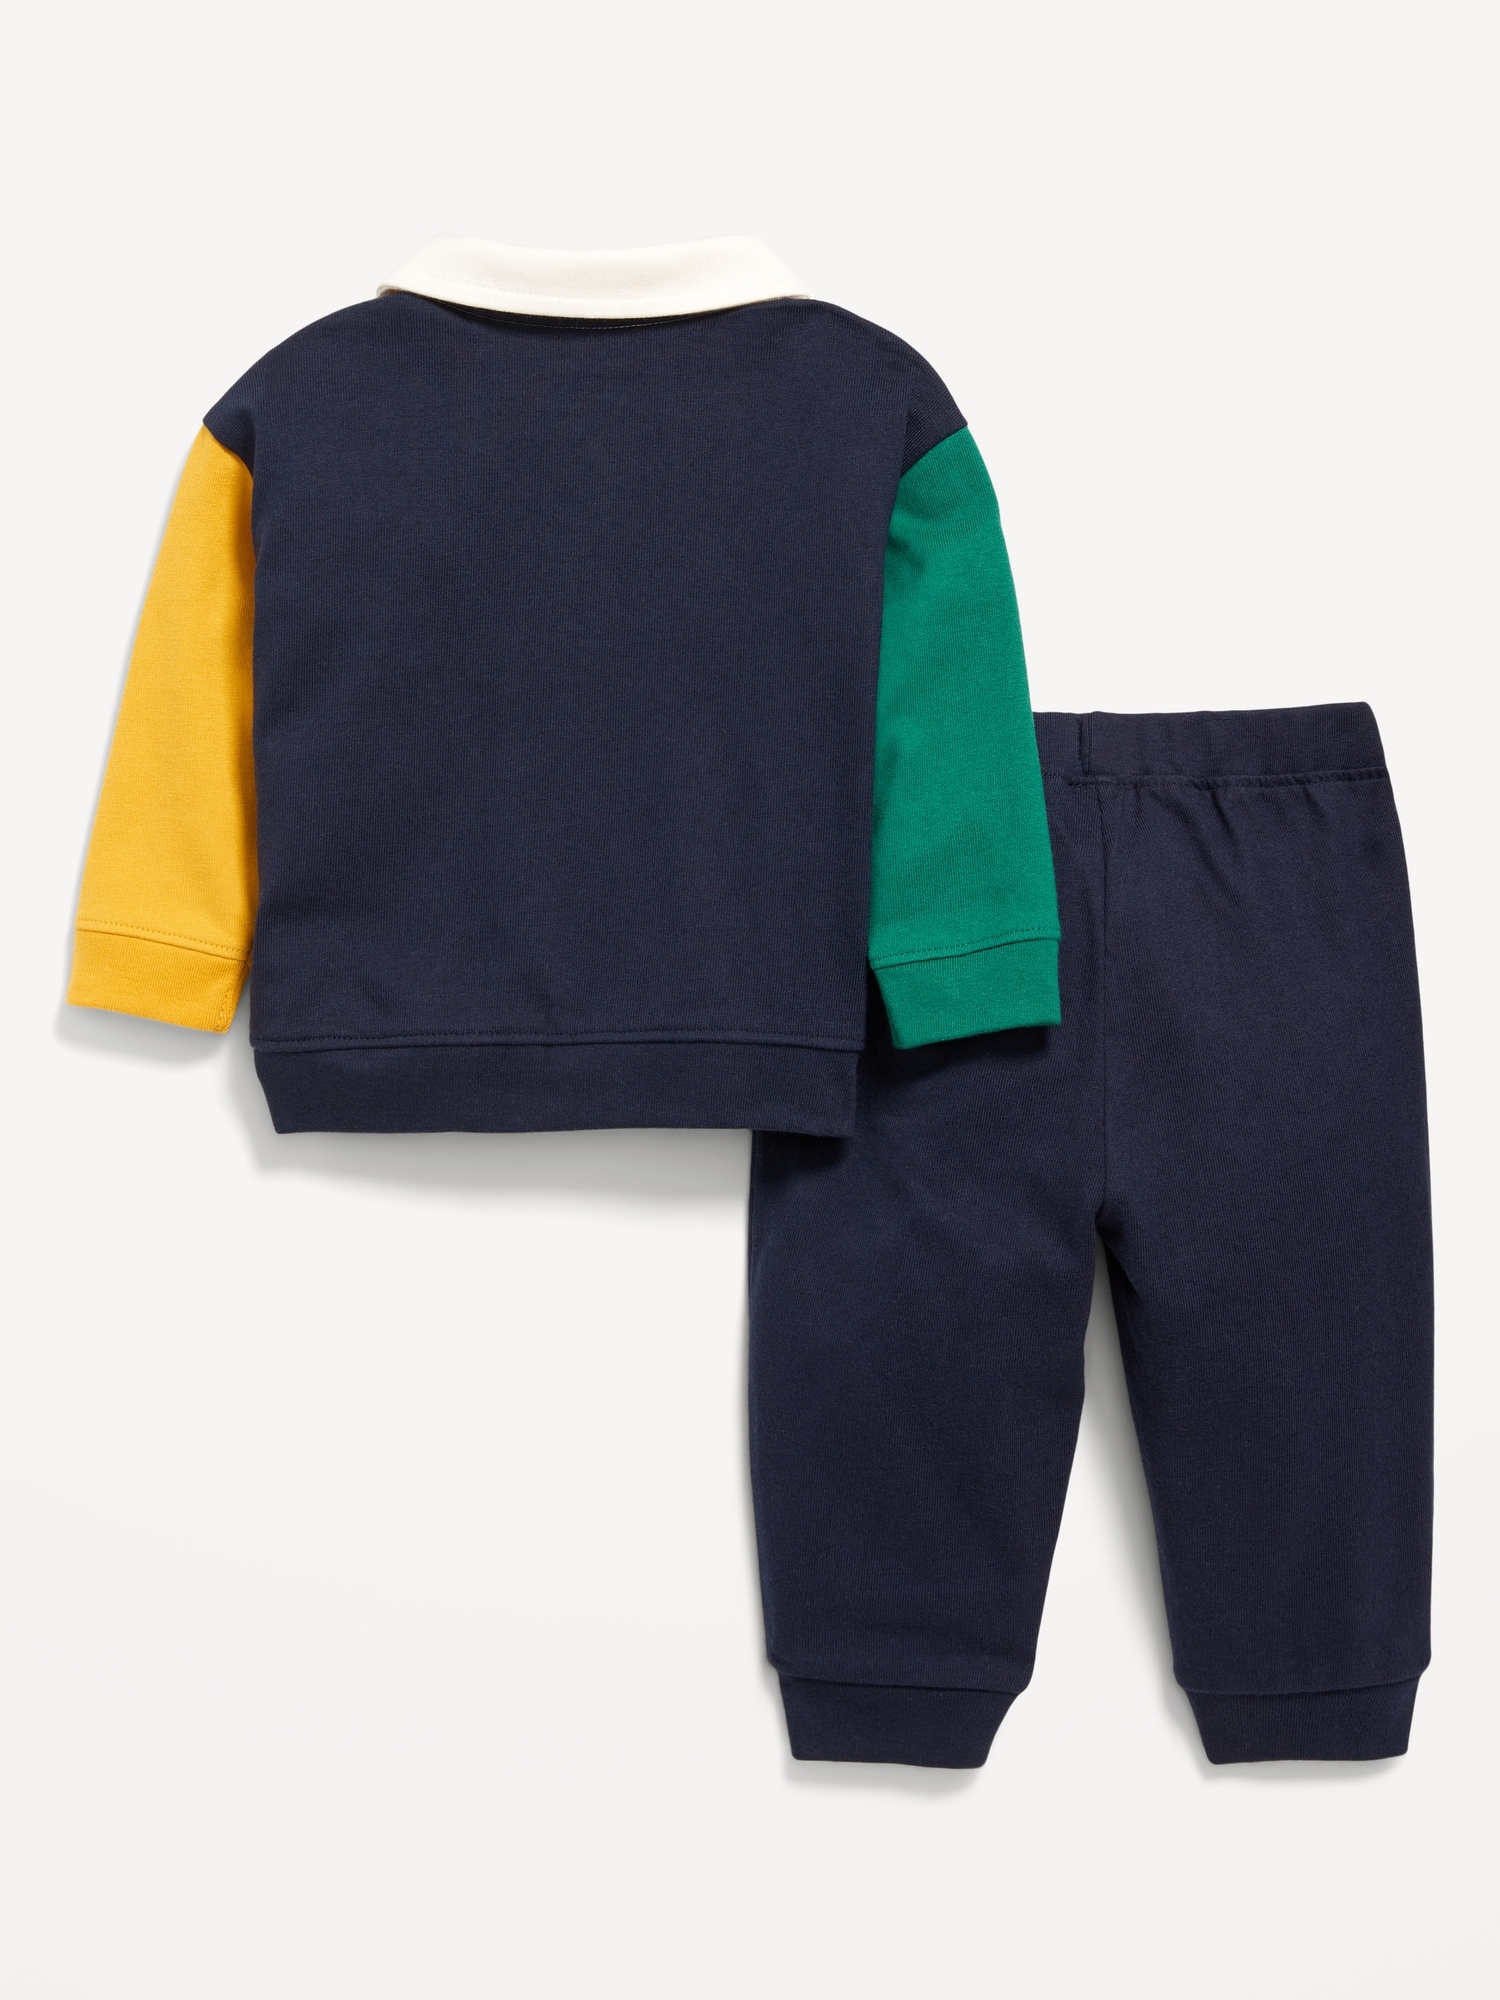 Long-Sleeve Jersey Knit Polo Shirt and Joggers Set for Baby